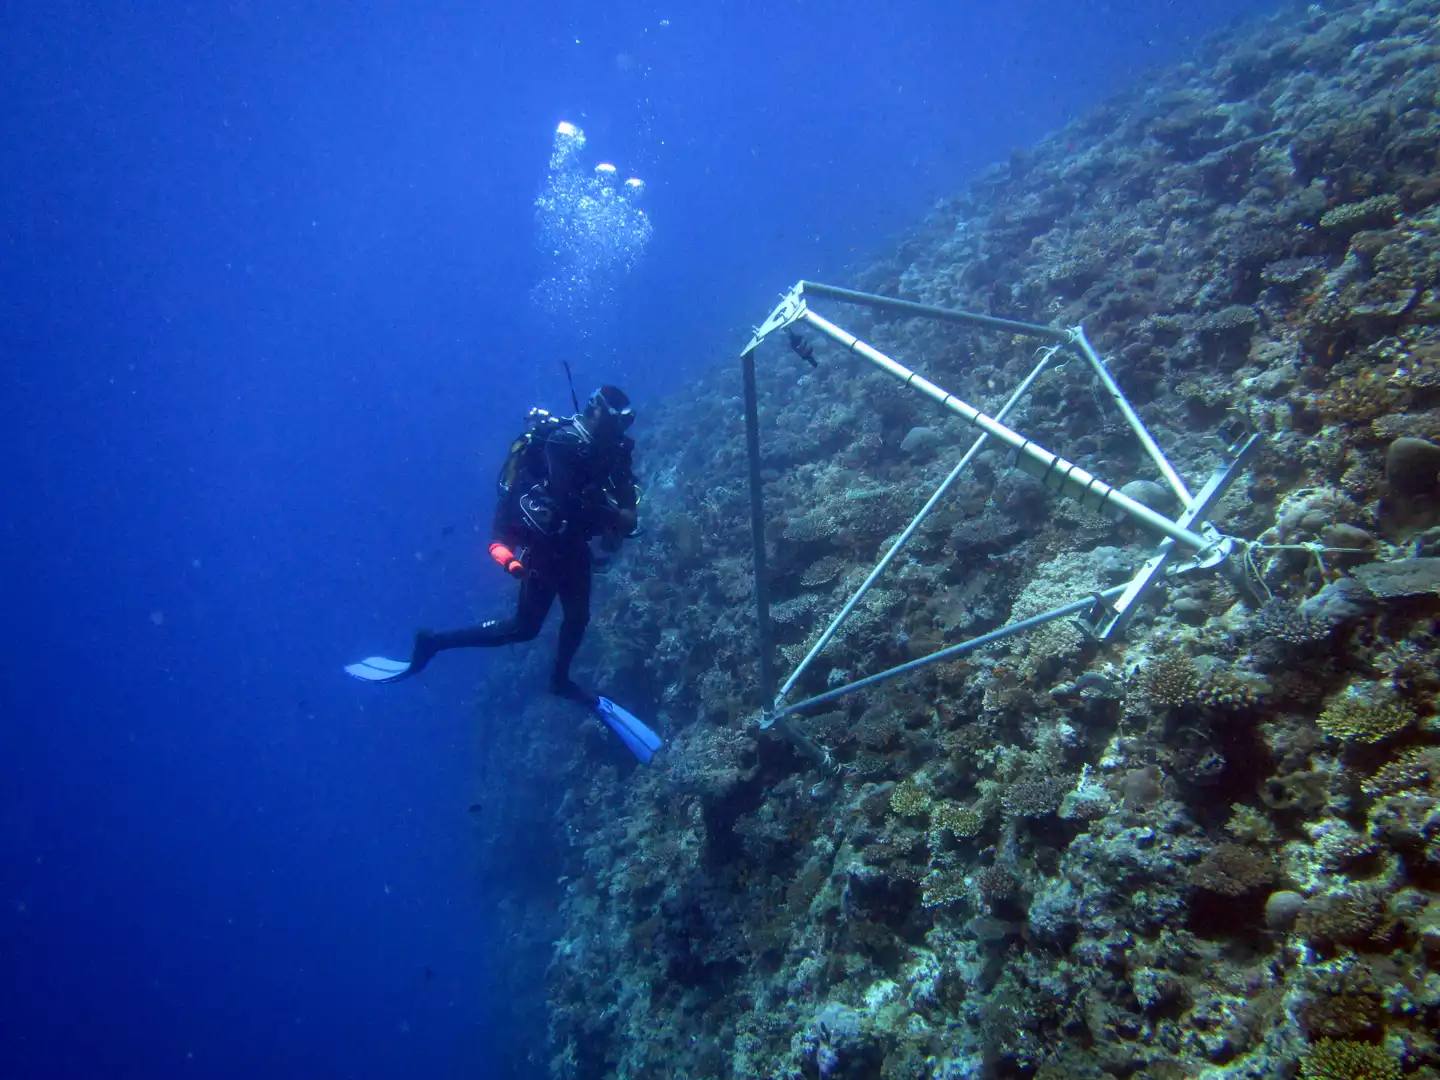 Overview of a tripod and diver